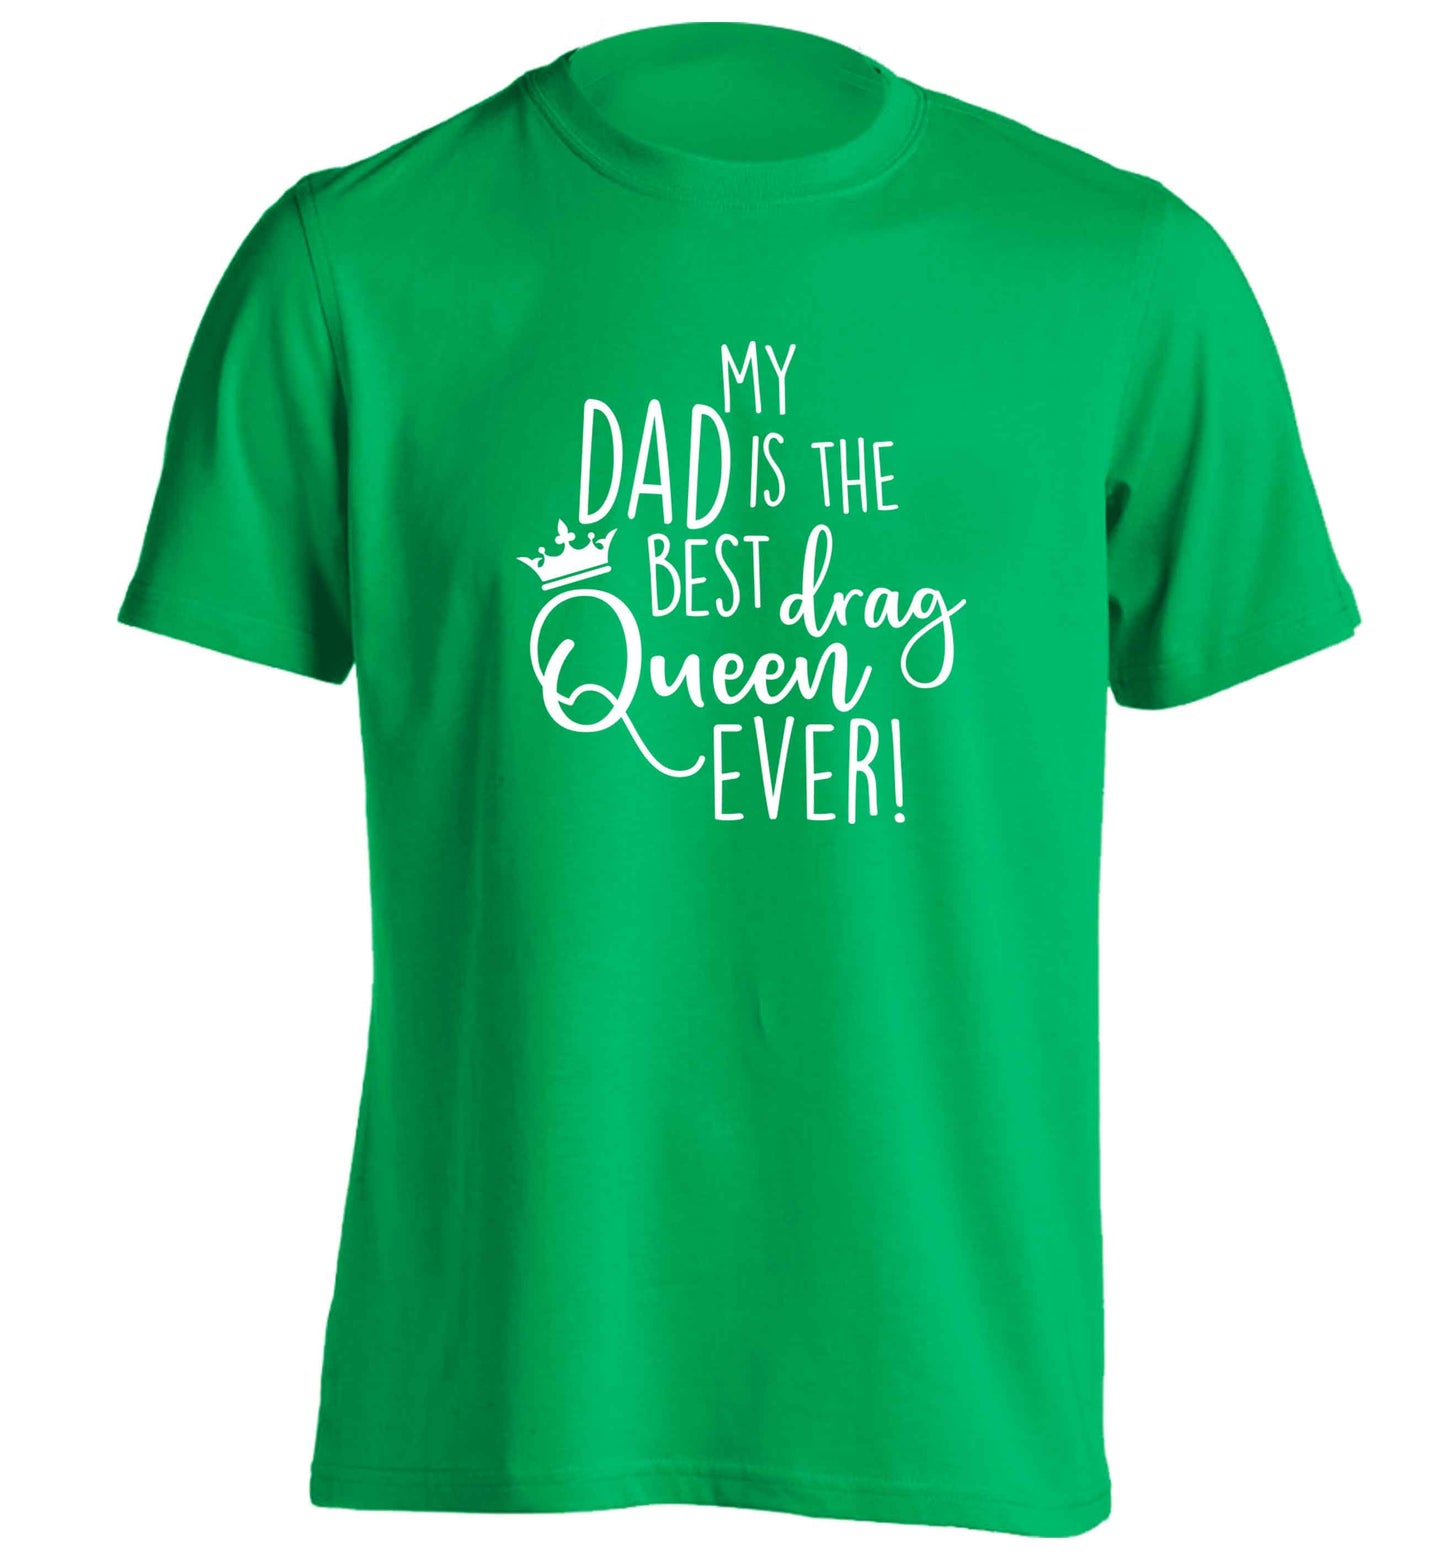 My dad is the best drag Queen ever adults unisex green Tshirt 2XL